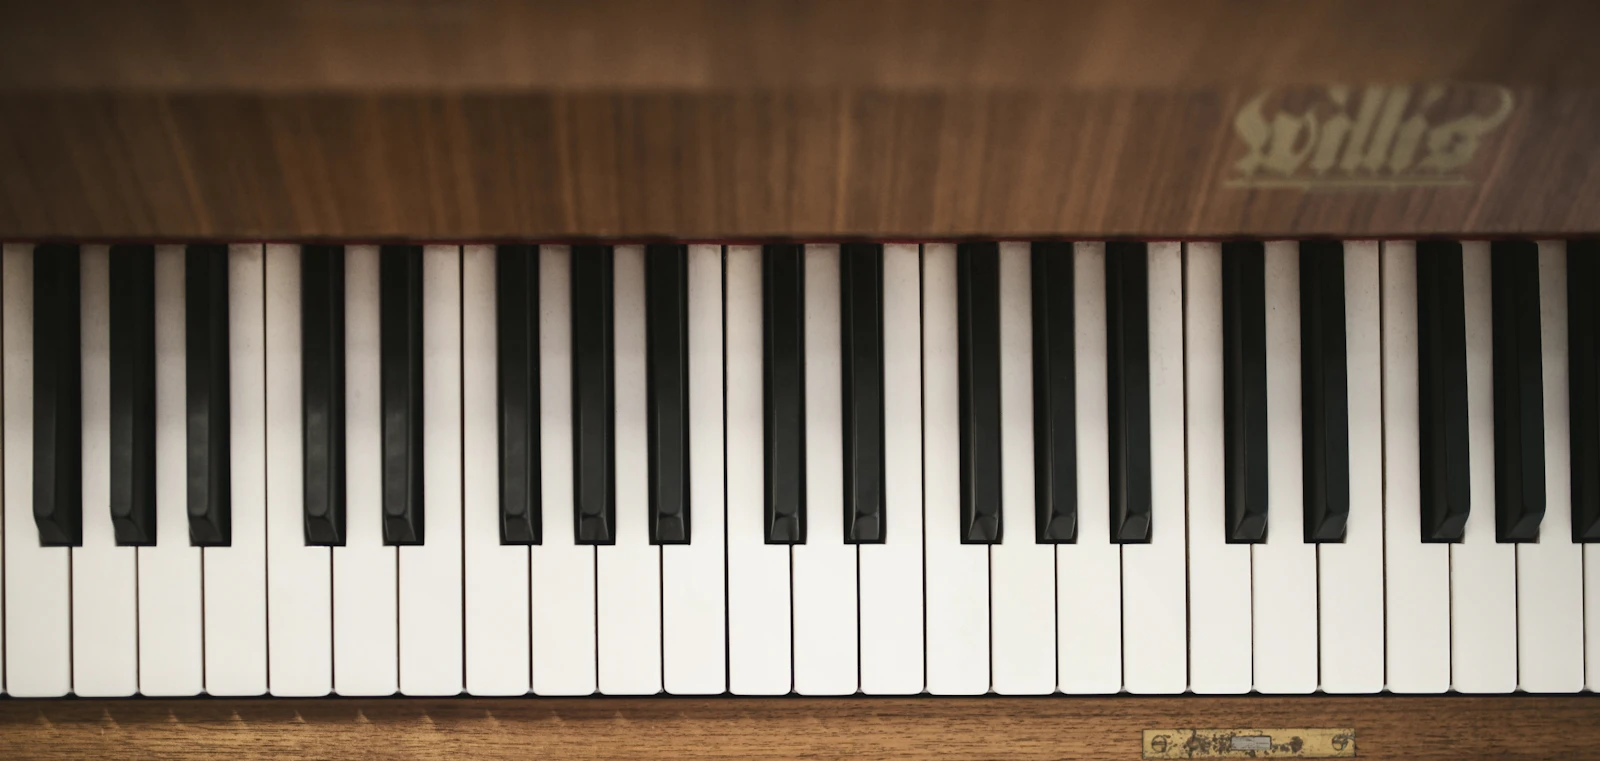 What Is A Chromatic Scale?